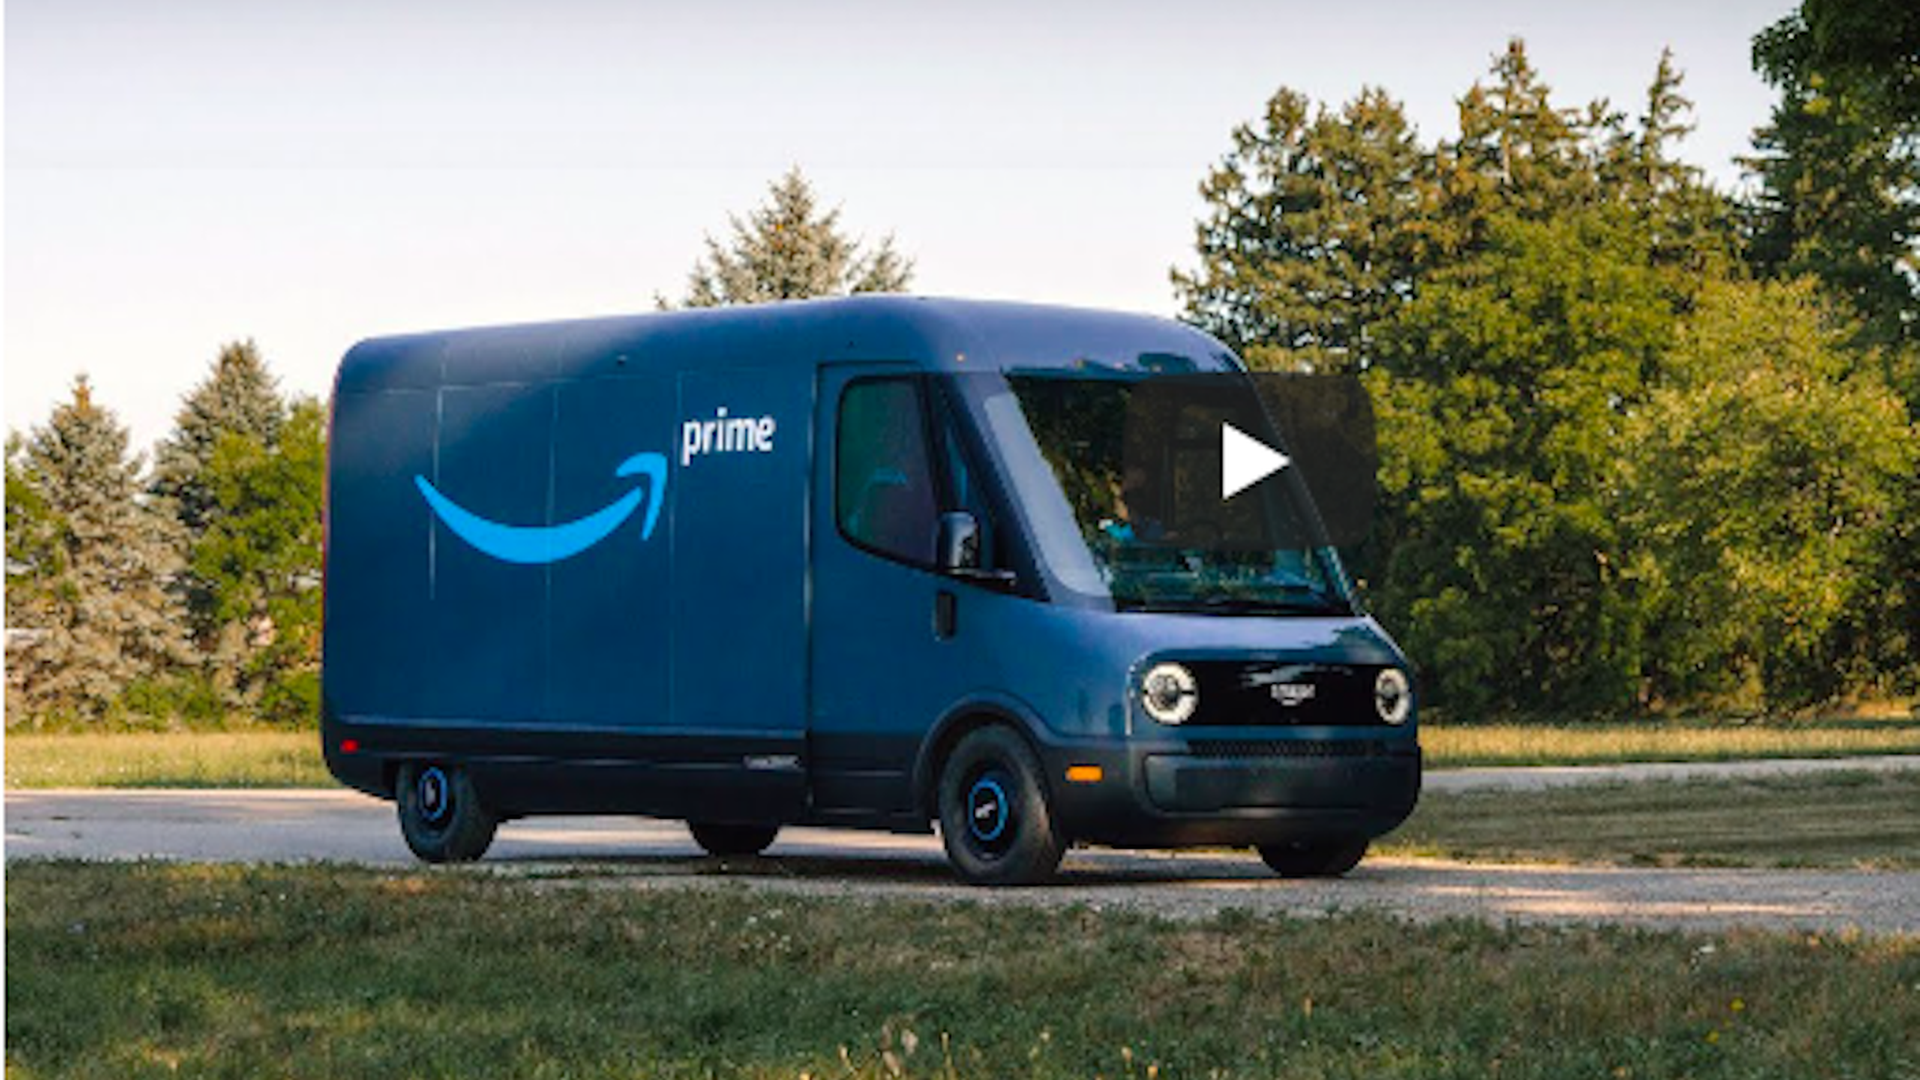 Gangster seng Hvile Amazon shows off its new Rivian electric delivery van - Axios